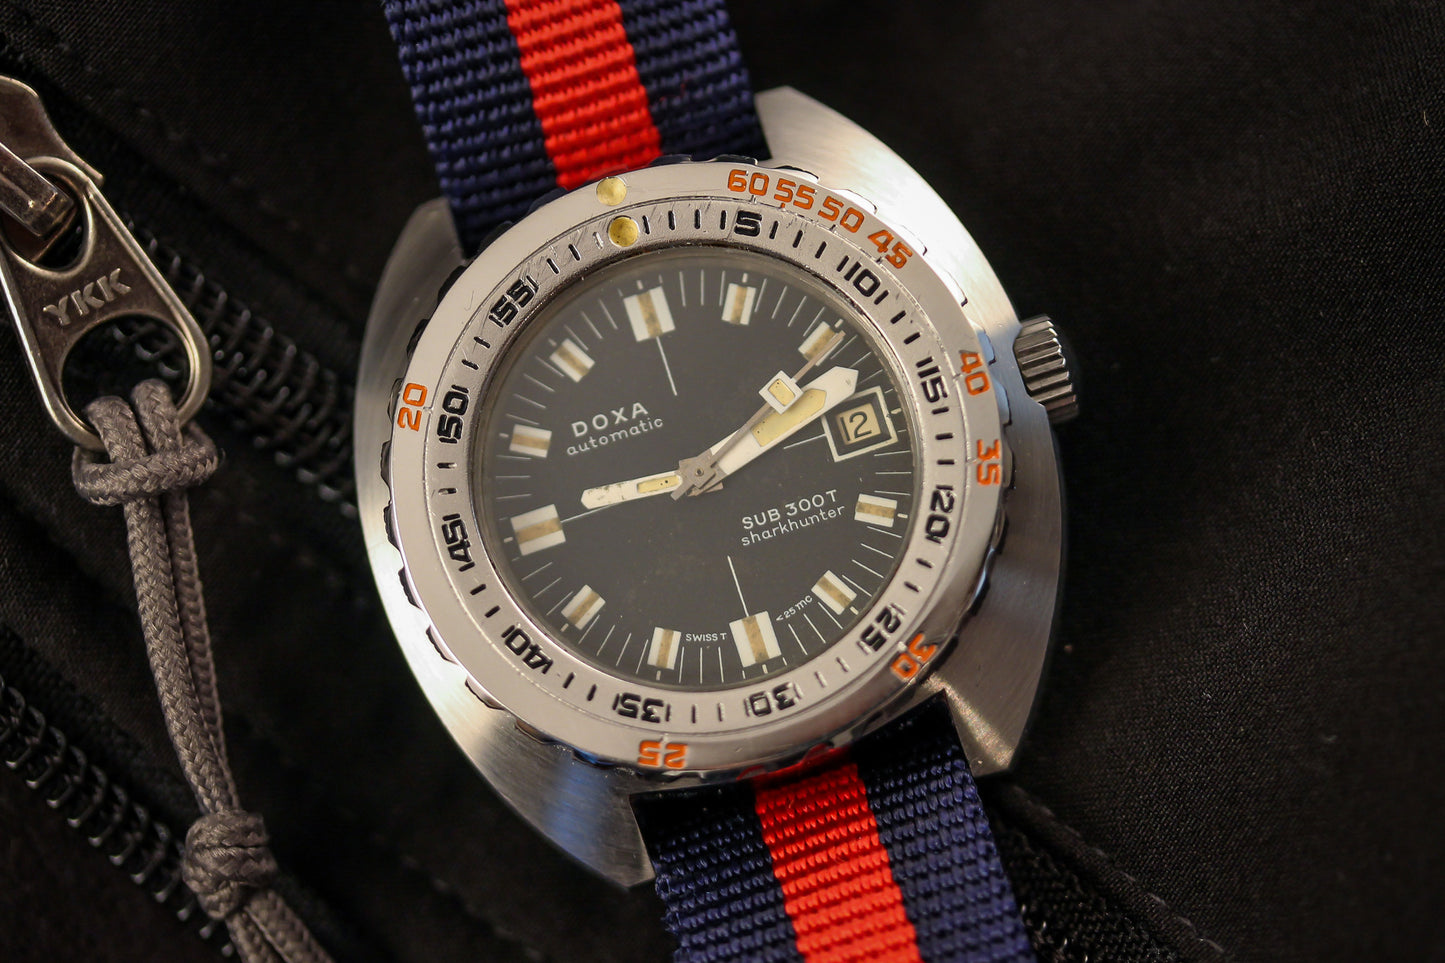 DOXA Sub 300T Sharkhunter Tropical Dial - Presented in Collaboration with Gear Patrol!